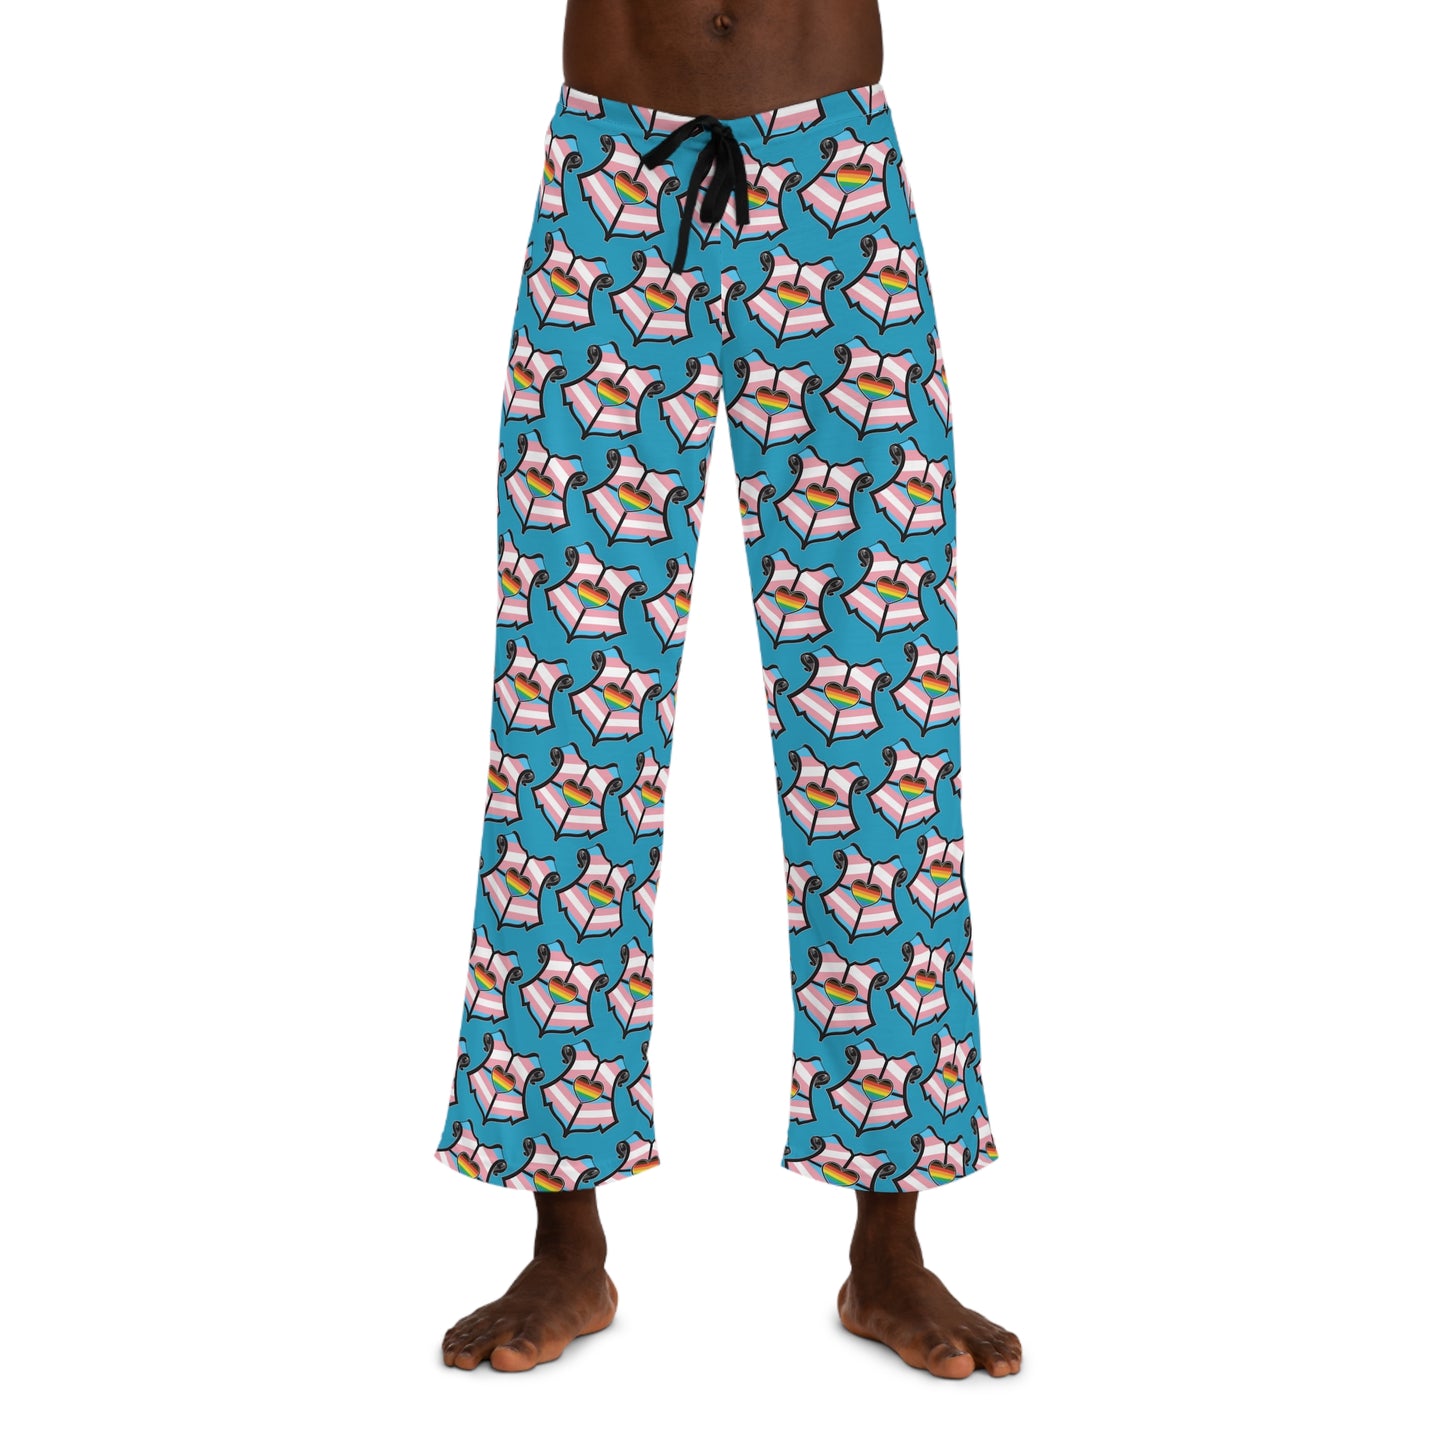 Wizards for Trans Rights Pajama Pants - Unisex Fit